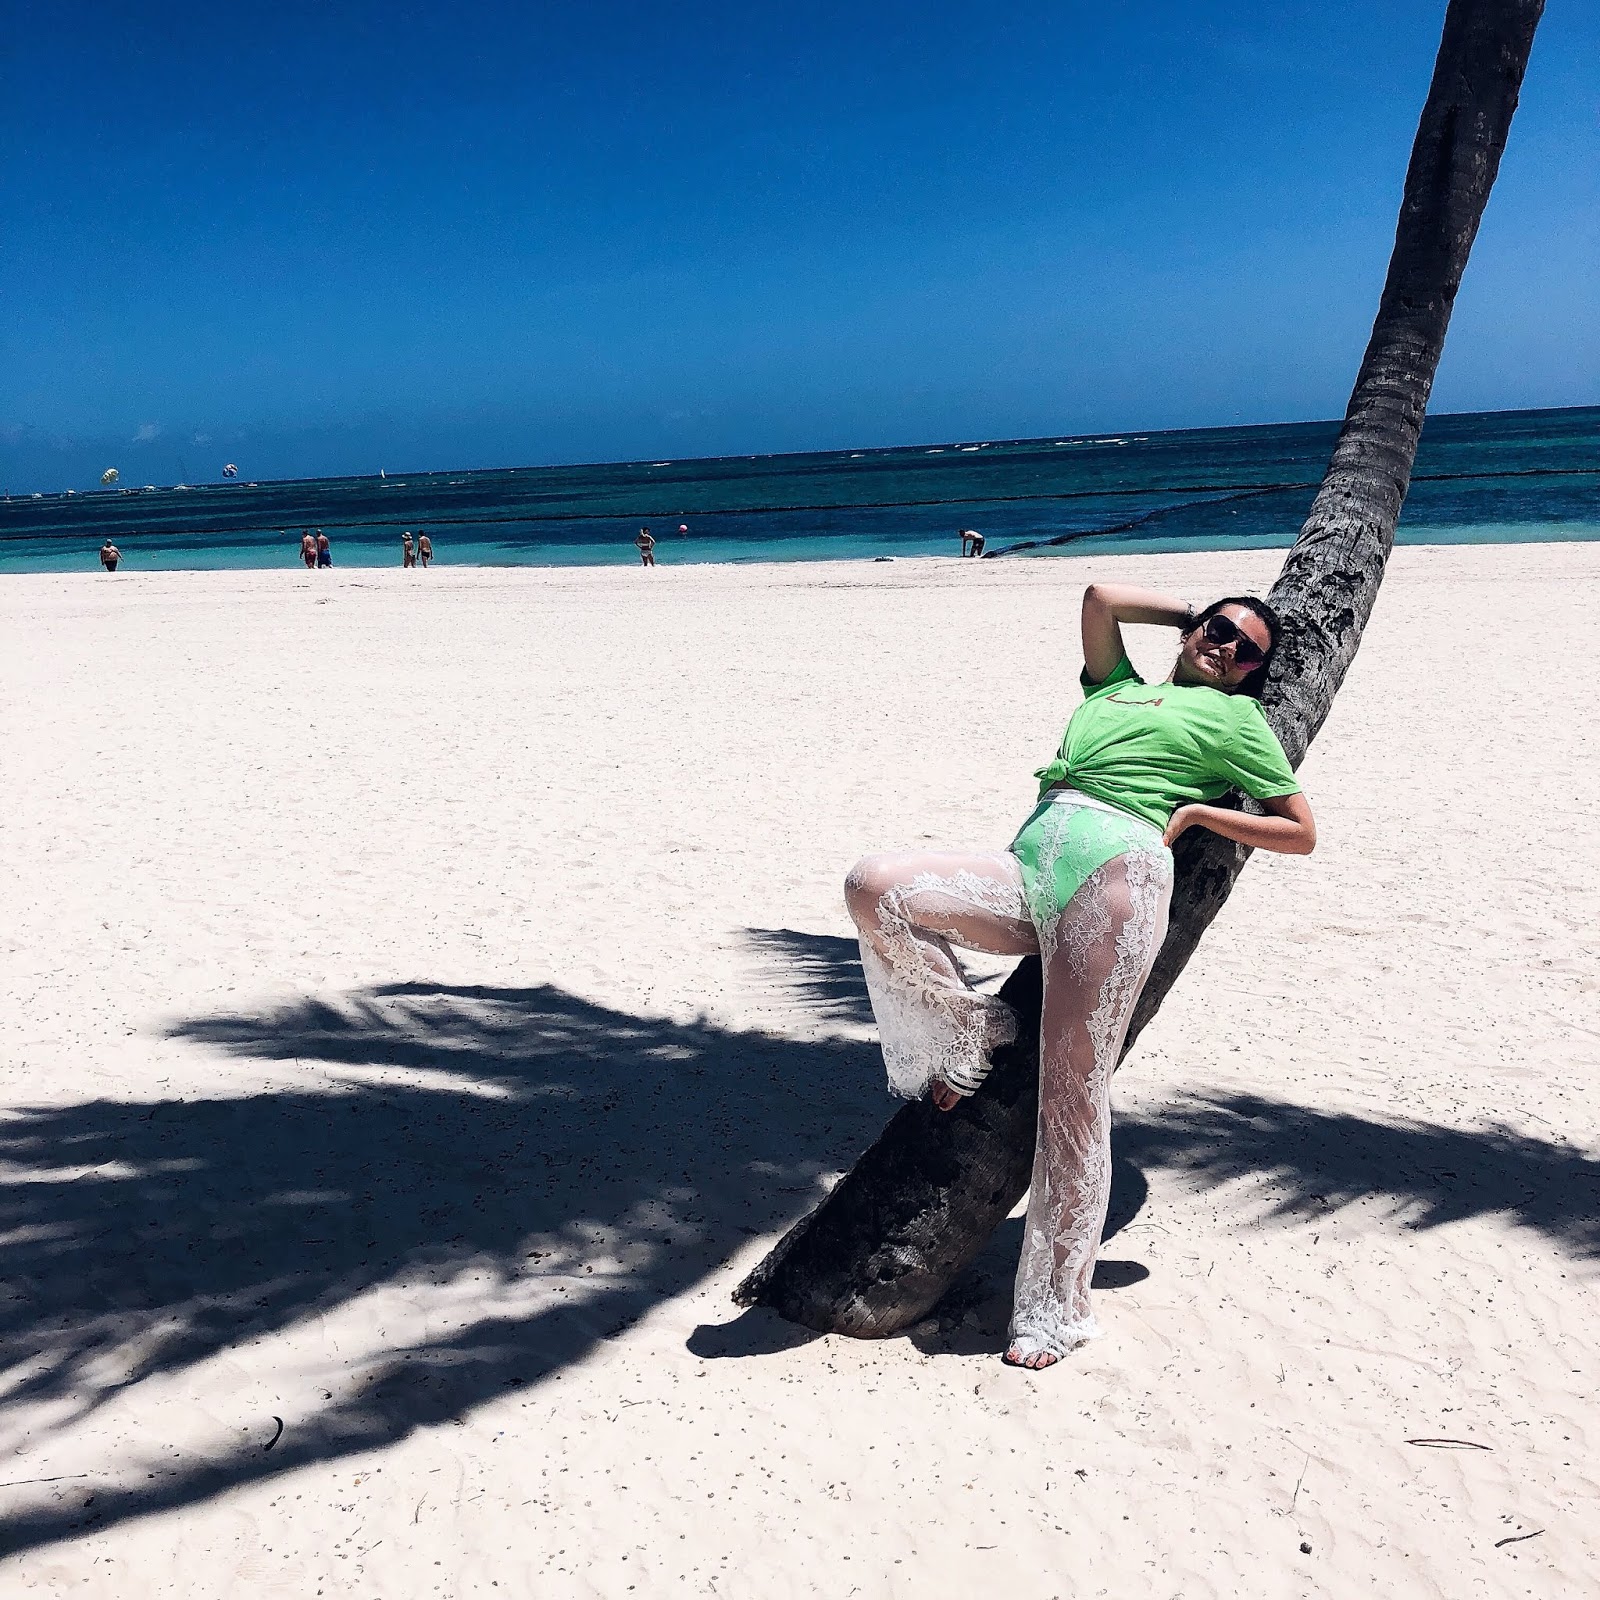 punta cana 2018, dominican repbulic, melia caribe punta cana, missguided lace trousers, travel guide, post holiday blues, how to beat post holiday blues, neon bikini, asos neon bikini, missguided haul